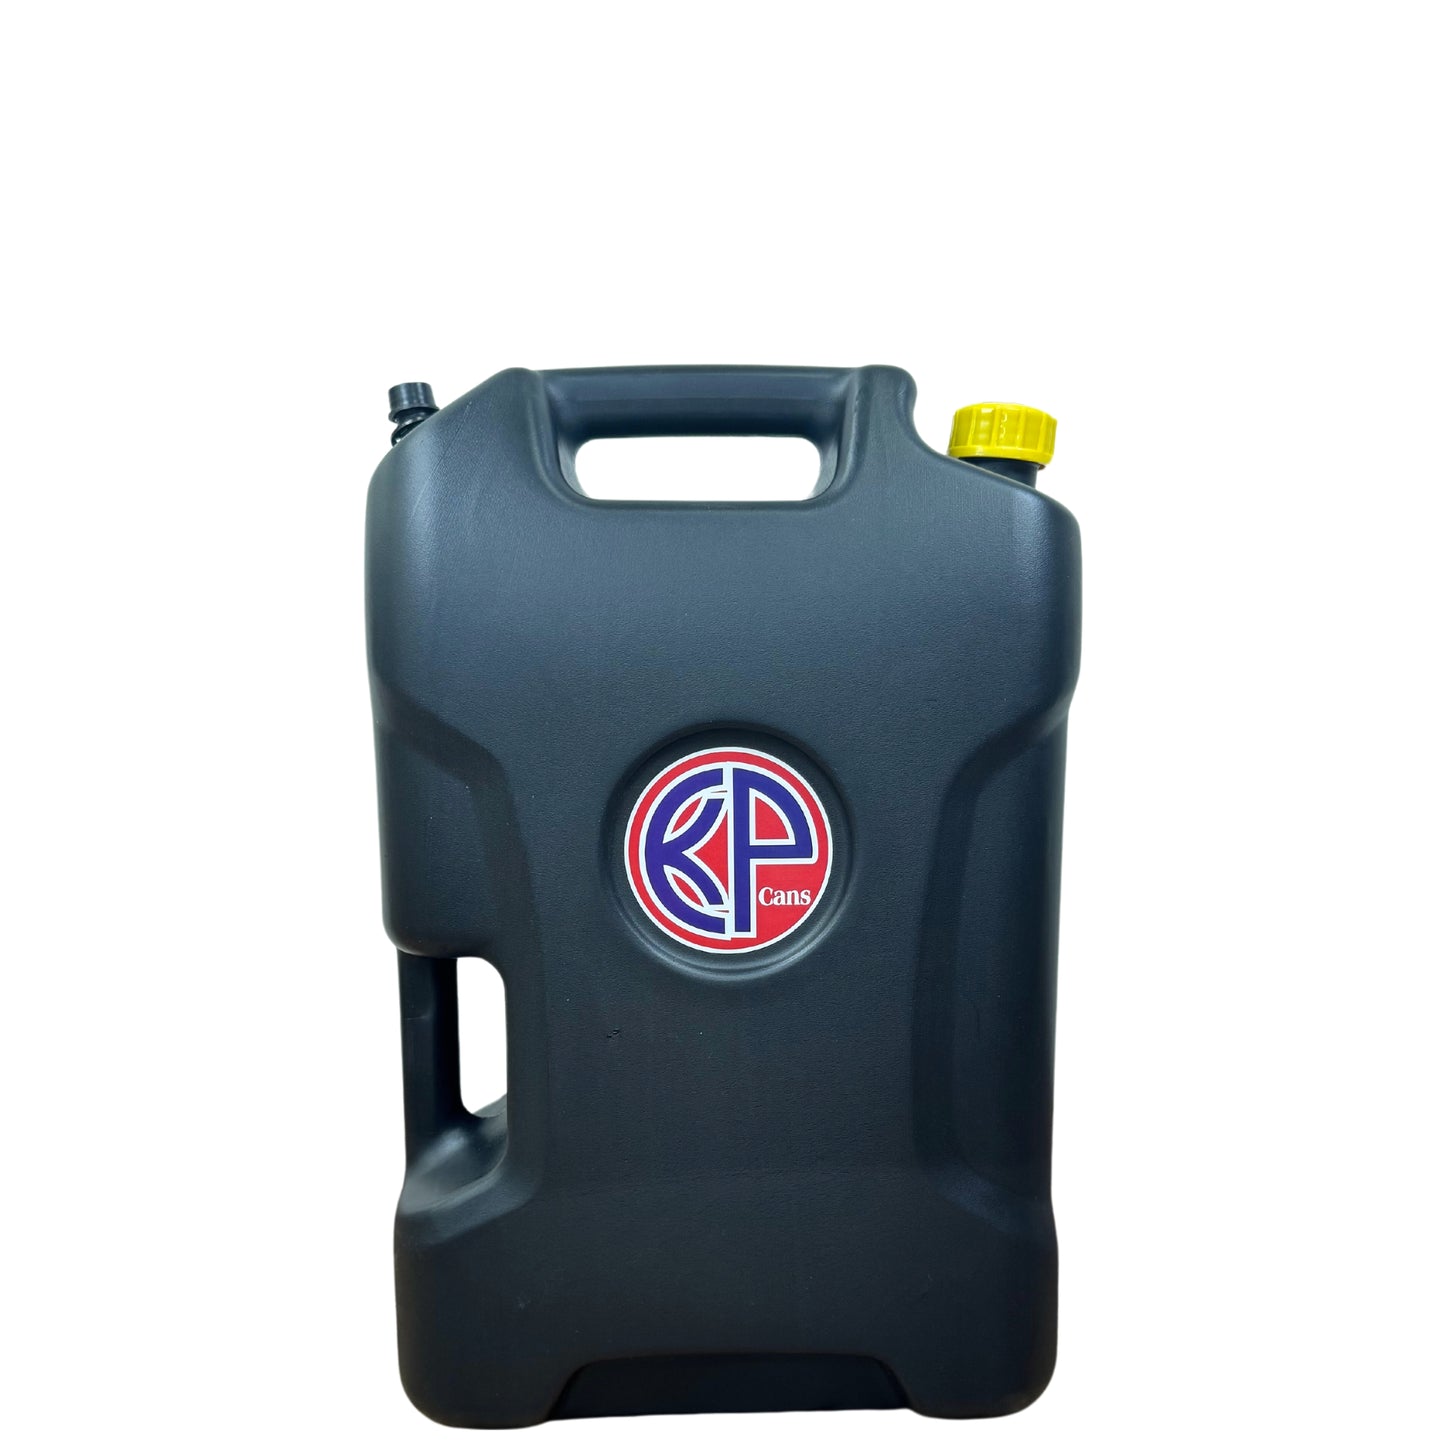 KP Cans 5.3 Gallon (Military) Jerry Can Style Multi-Functional Utility Container Equipped w/ 2 Handgrips | 8inch Flexible Spout Nozzle, Thick Rubber pad, Spout Cover | BPA Free - Kool Products